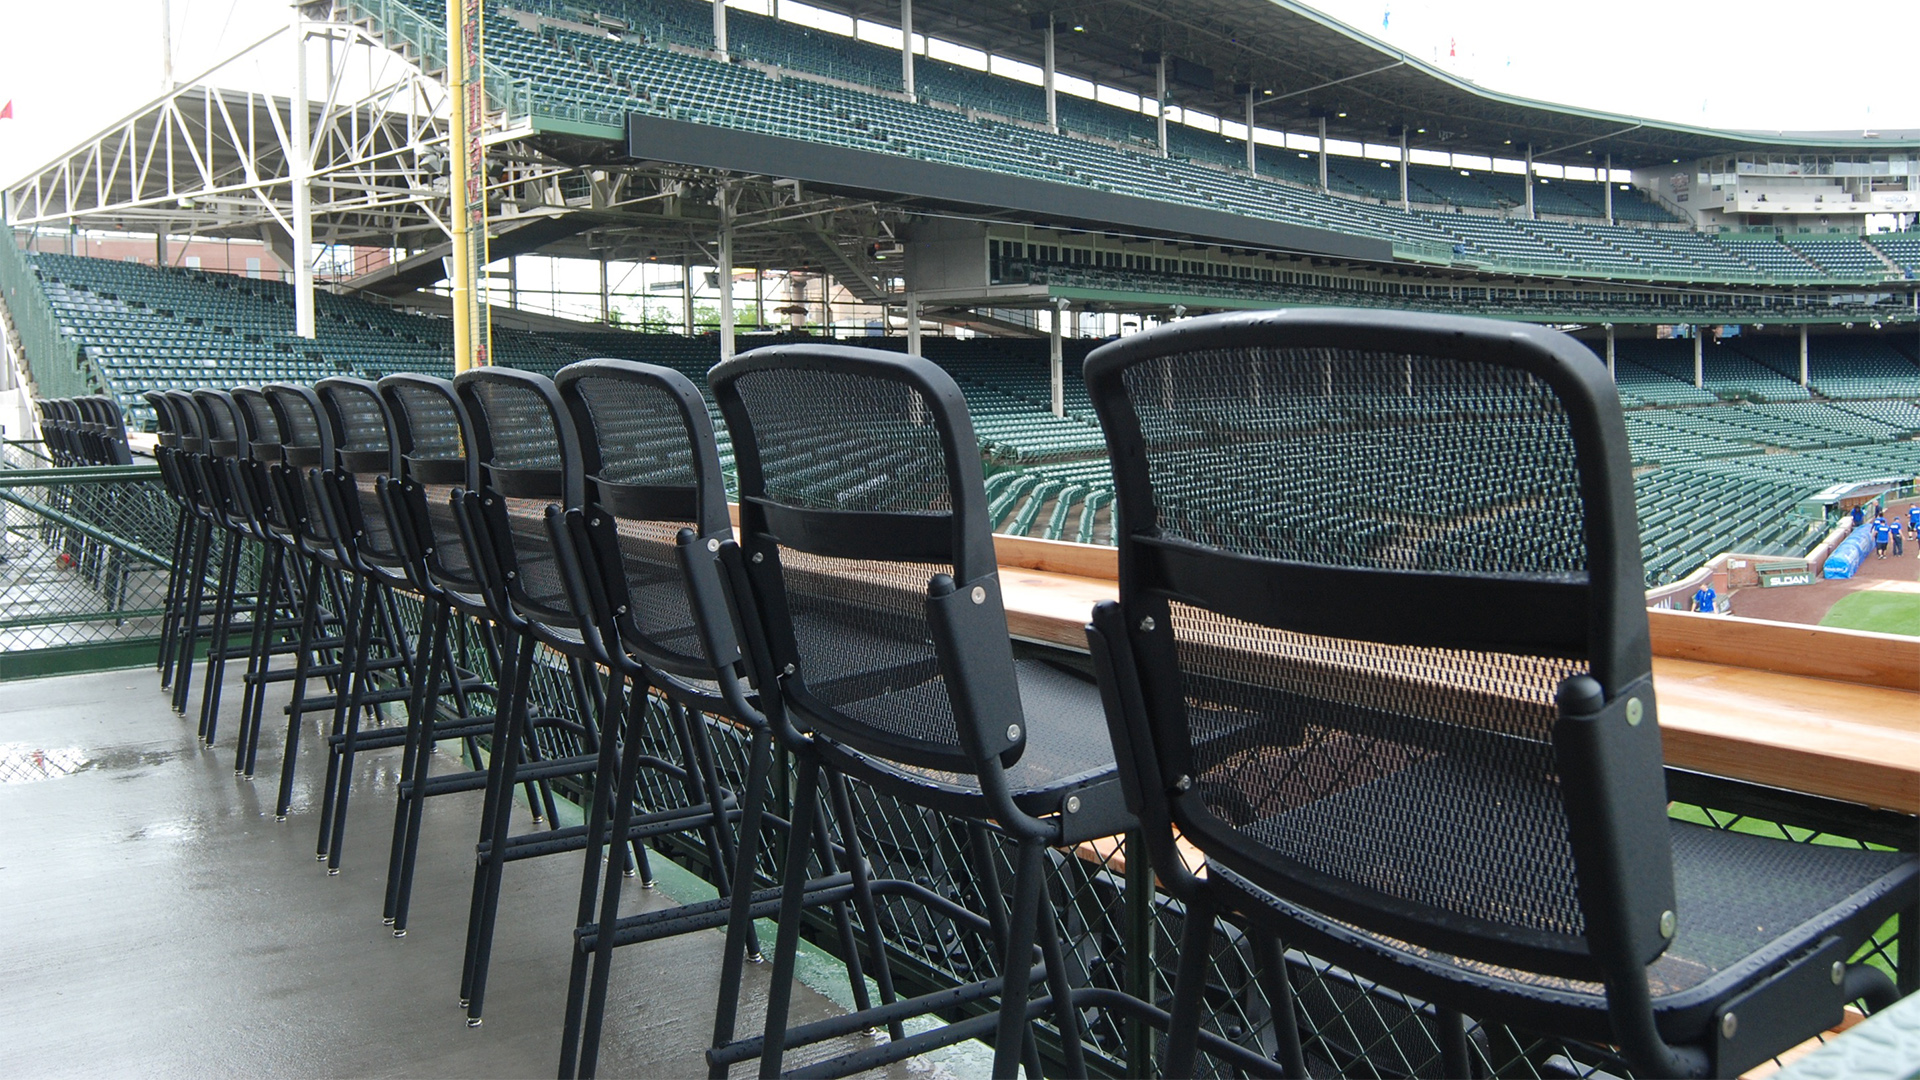 4Topps Folding Barstools at Chicago Cubs